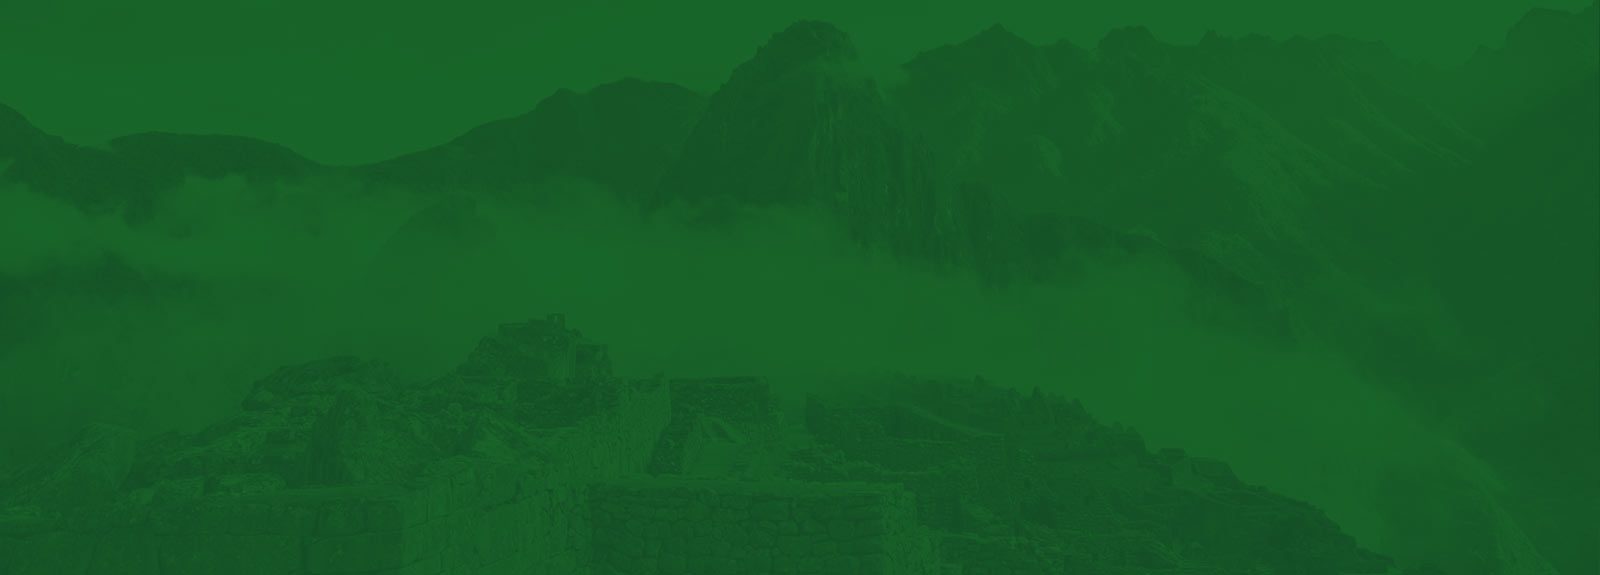 Machu Picchu background image with green overlay